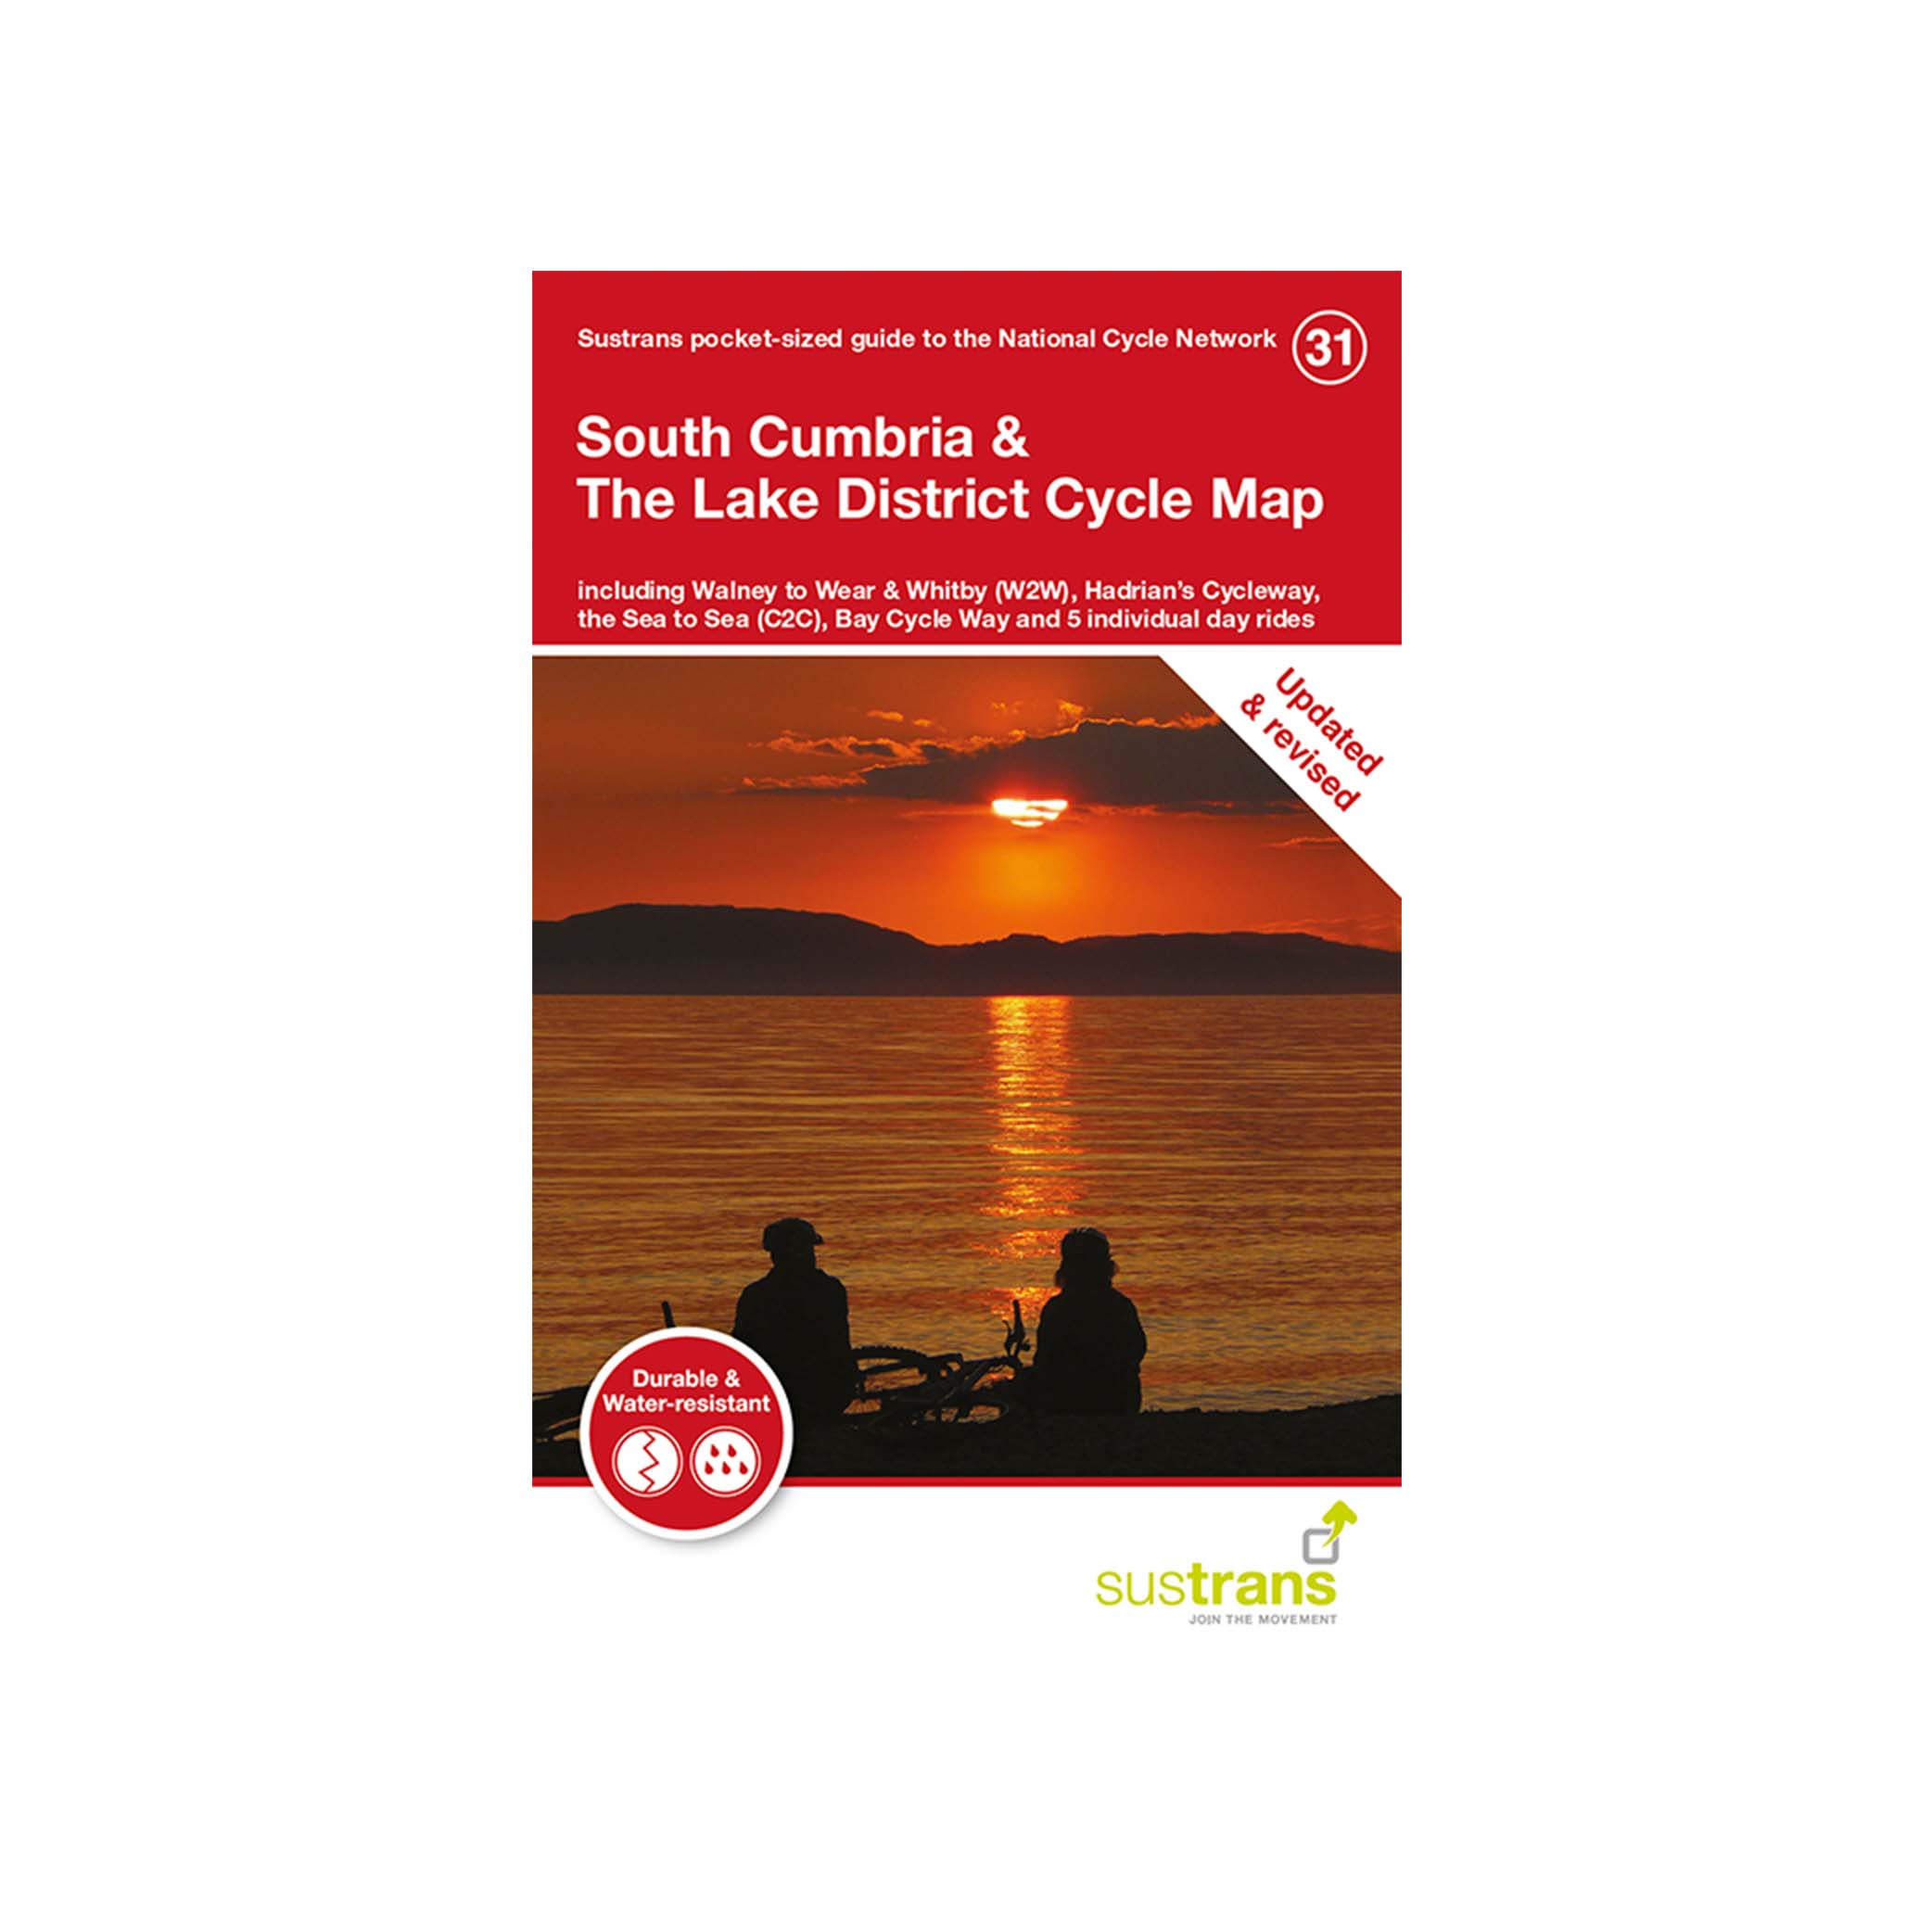 south-cumbria-the-lake-district-cycle-map-31